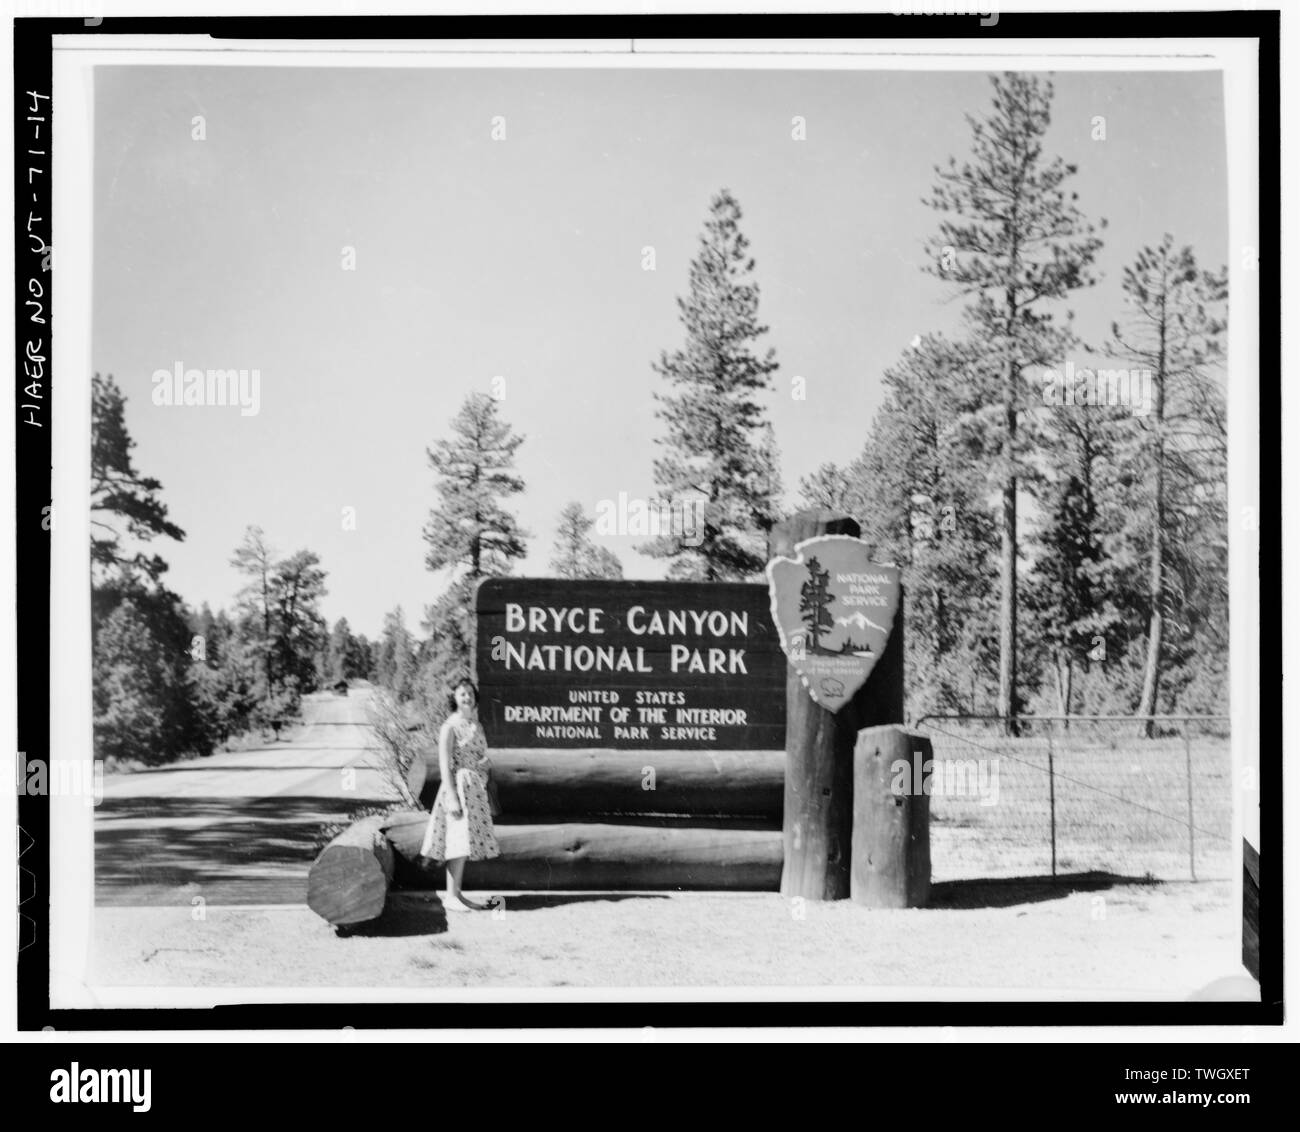 RUSTIC ENTRANCE SIGN AT NORTH PARK BOUNDARY - Bryce Canyon National Park Rim Road, State Highway 63 to Rainbow Point, Tropic, Garfield County, UT; U.S. Forest Service; Bureau of Public Roads; Union Construction Company; WW Clyde and Company; Reynolds-Ely Construction Company; Bryce, Ebenezer; Humphrey, J W; Harding, Warren G; Allen, Thomas J; Brown, R A; Finch, B J; Civilian Conservation Corps; Quin, transmitter; French, Christine Madrid, historian; Grogan, Brian C, photographer Stock Photo